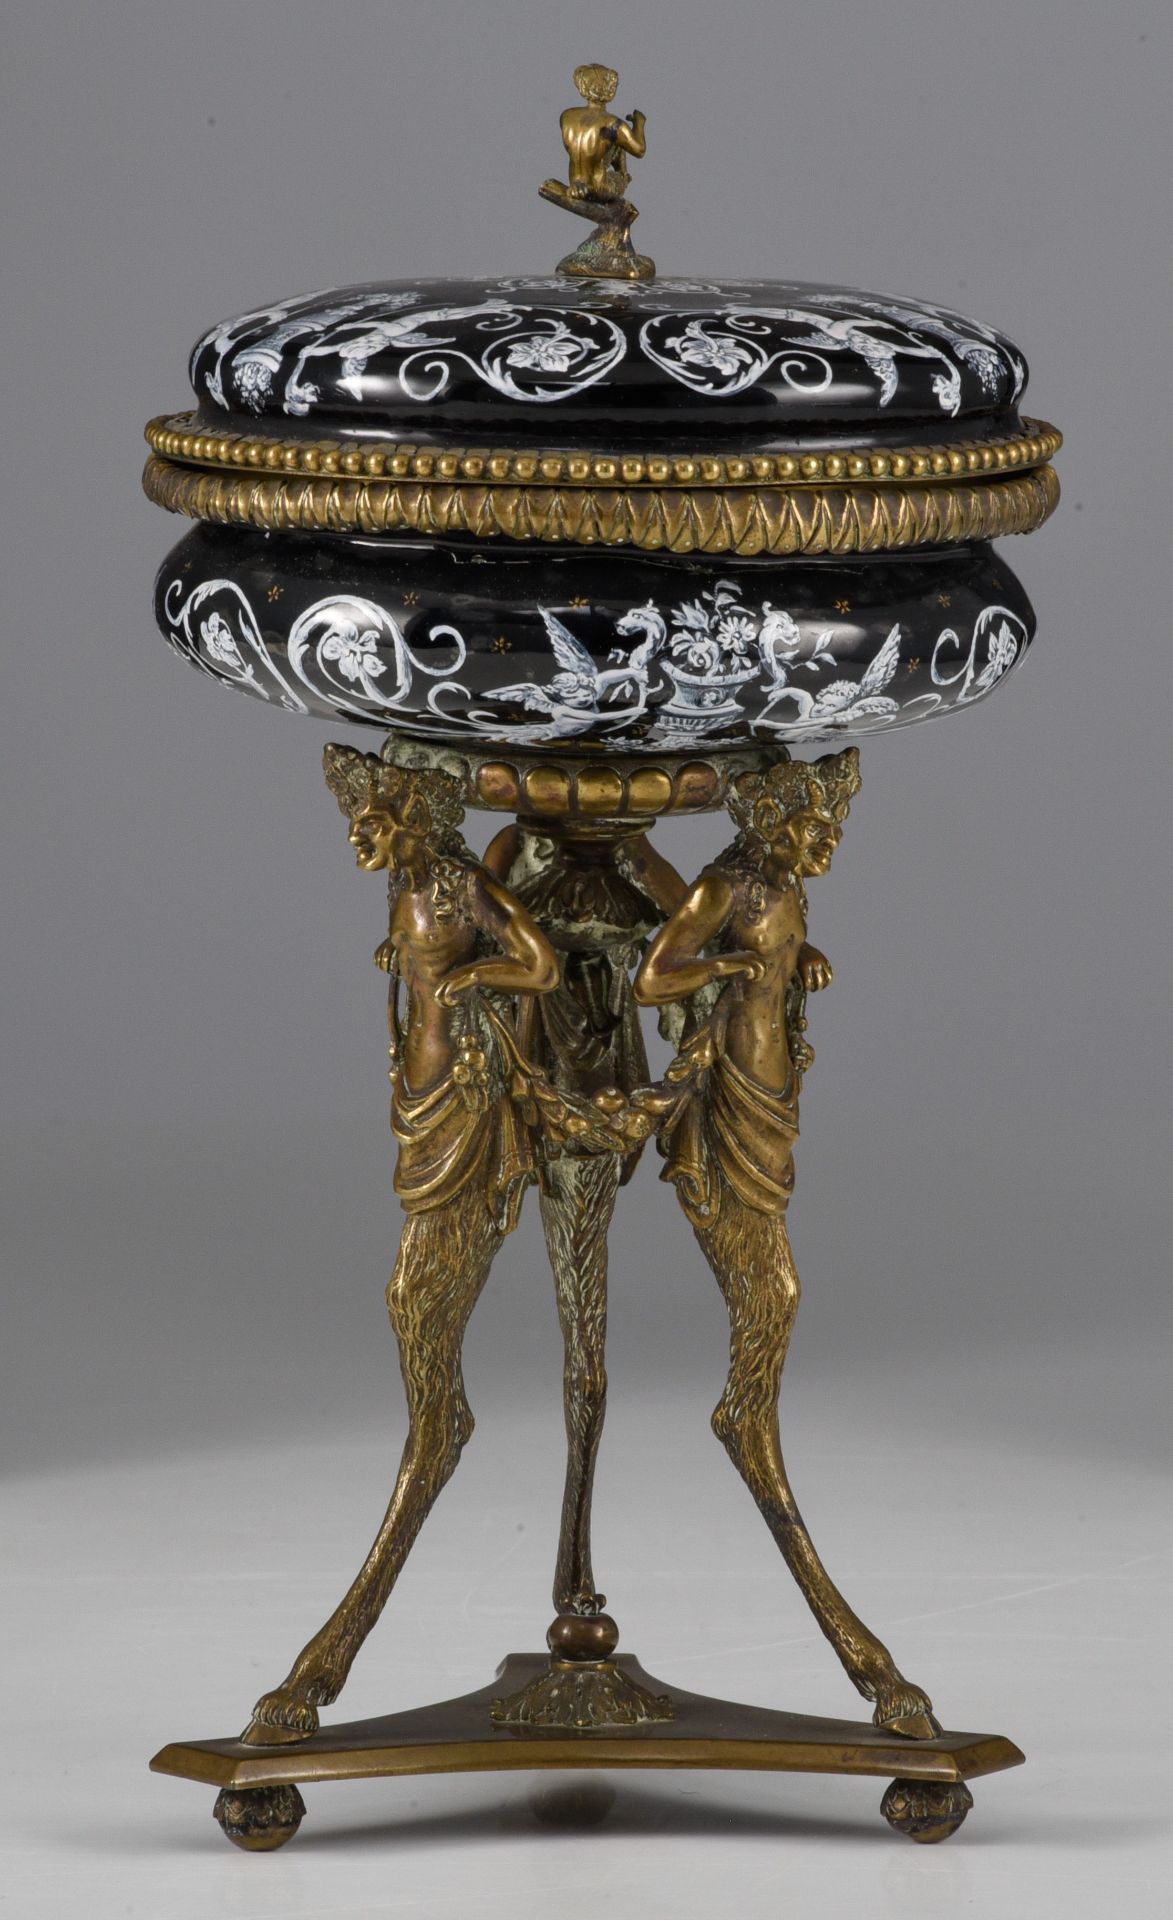 A Limoges enamel box with cover and a tazza with cover, Napoleon III period, H 8 - 23 cm - Image 12 of 16